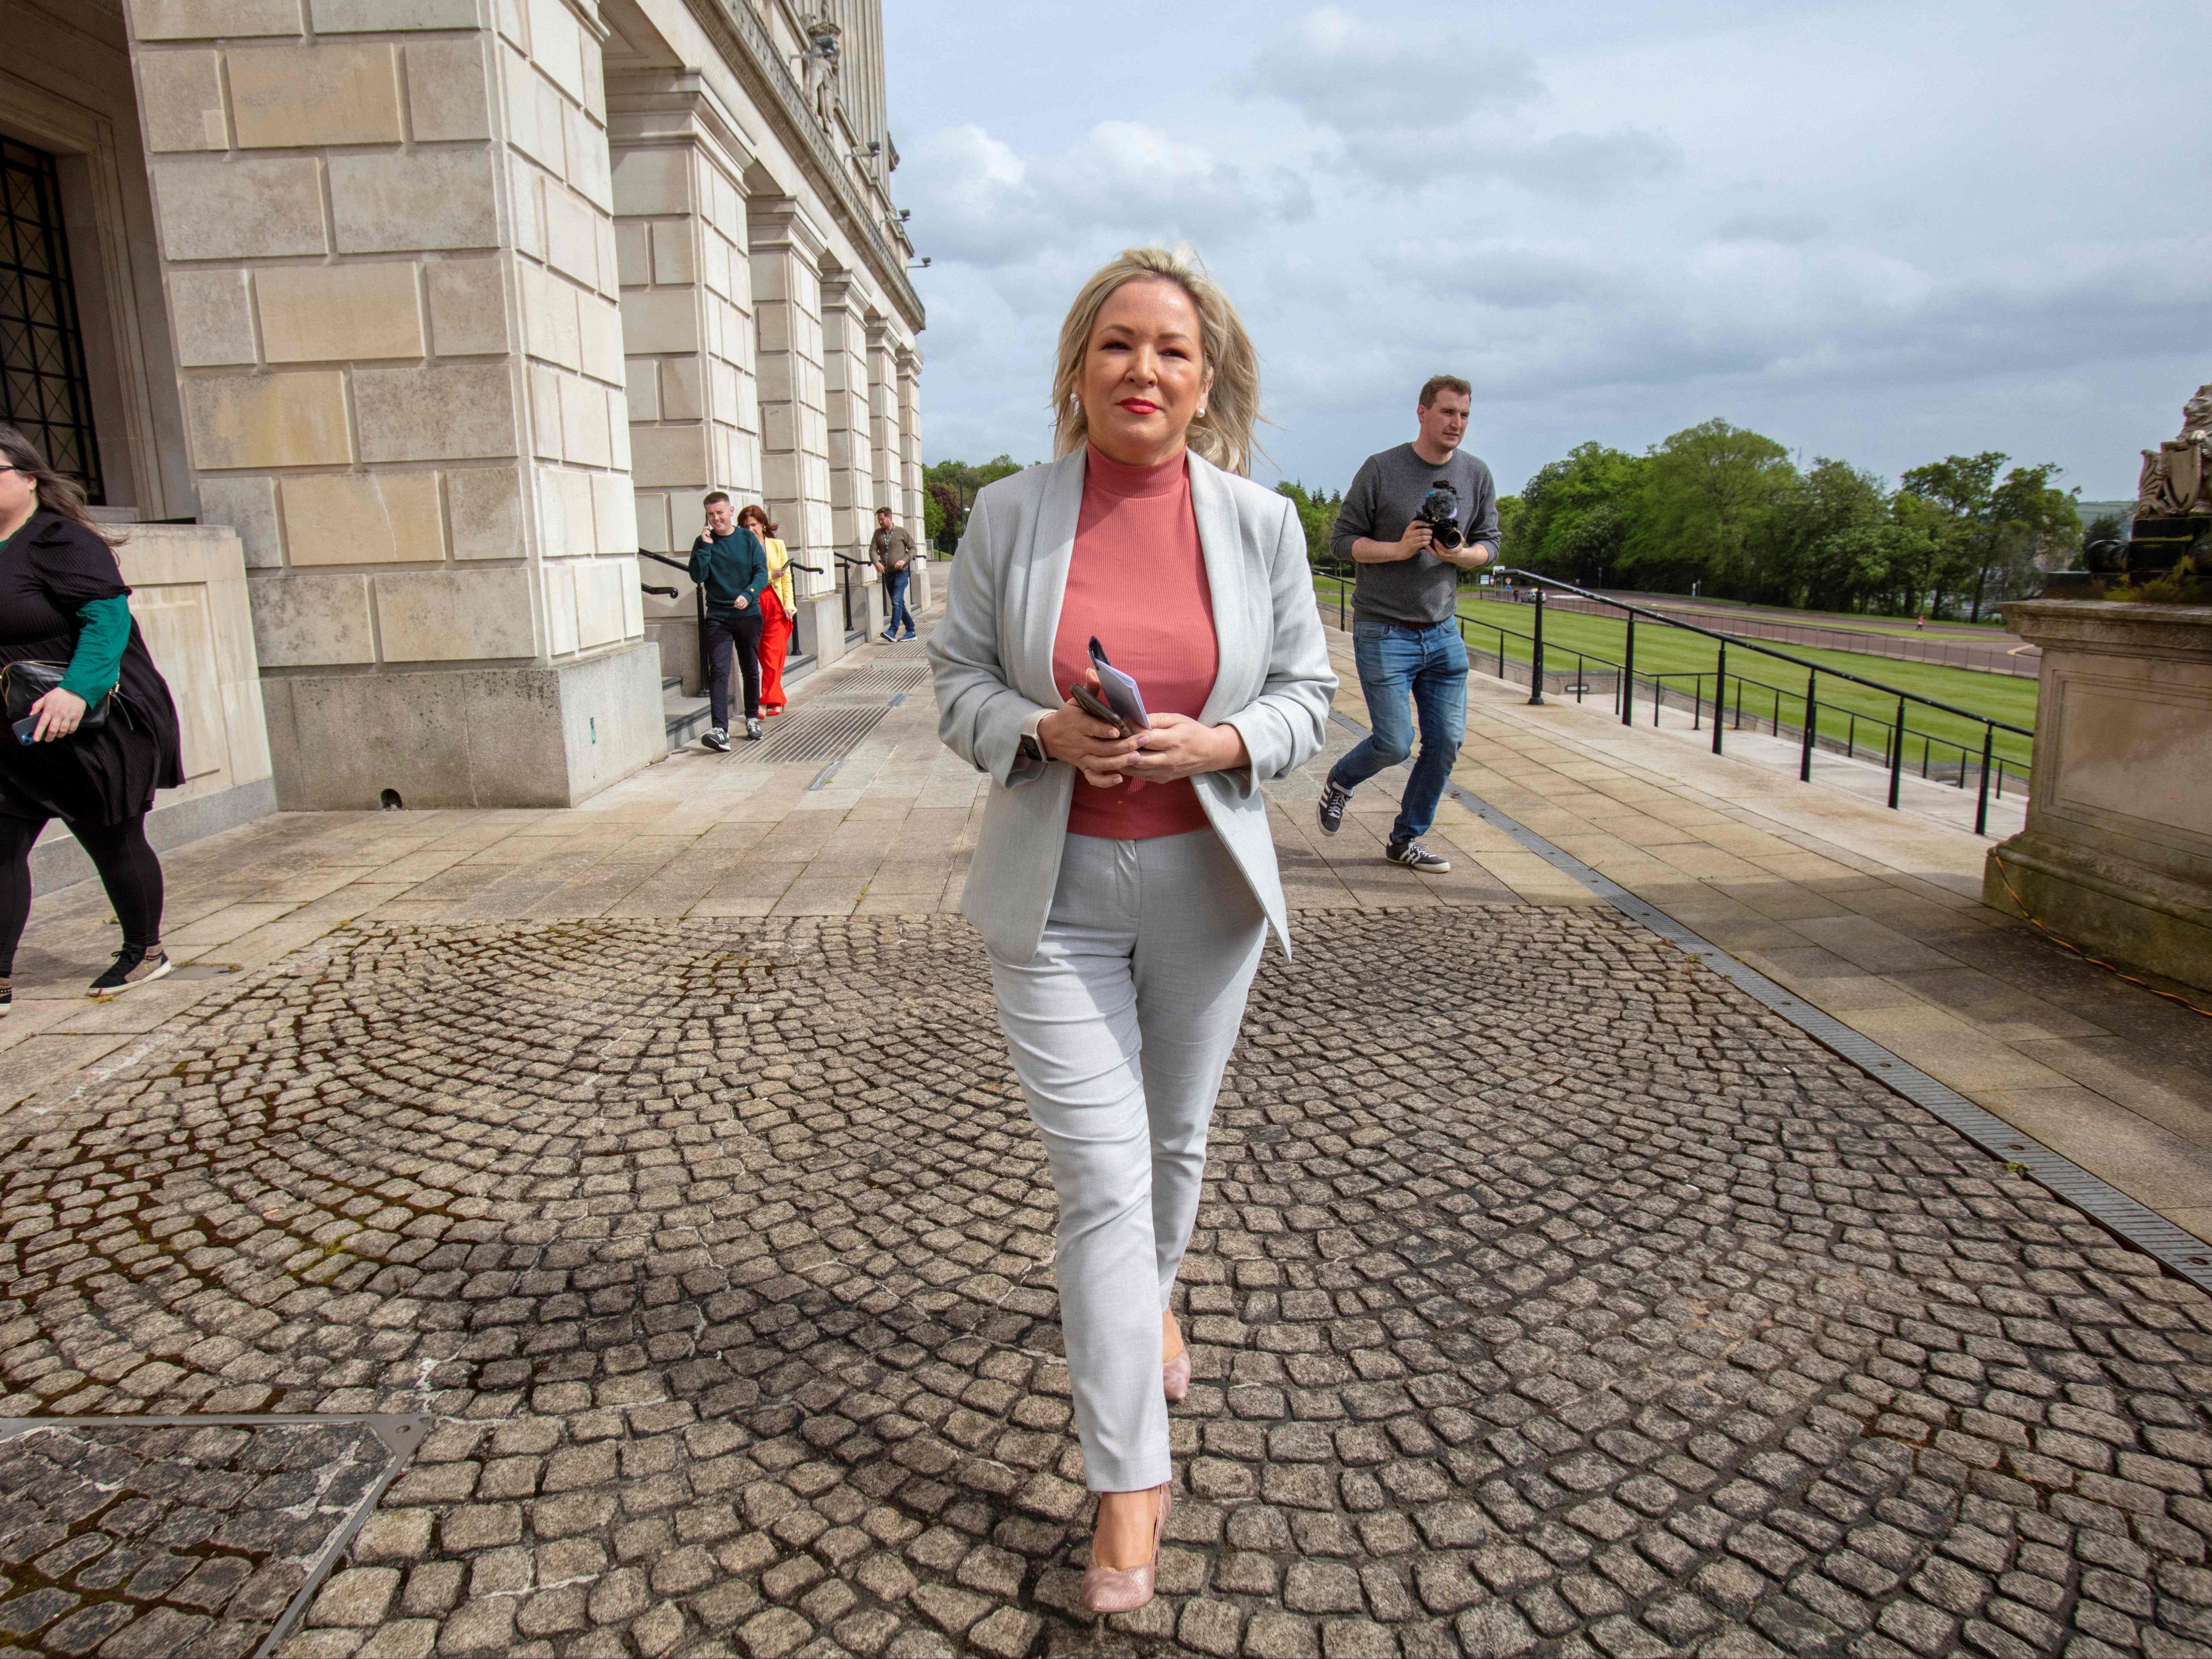 Northern Ireland’s First Minister Michelle O’Neill said the Budget showed the Conservative Party continuing with its ‘austerity agenda’